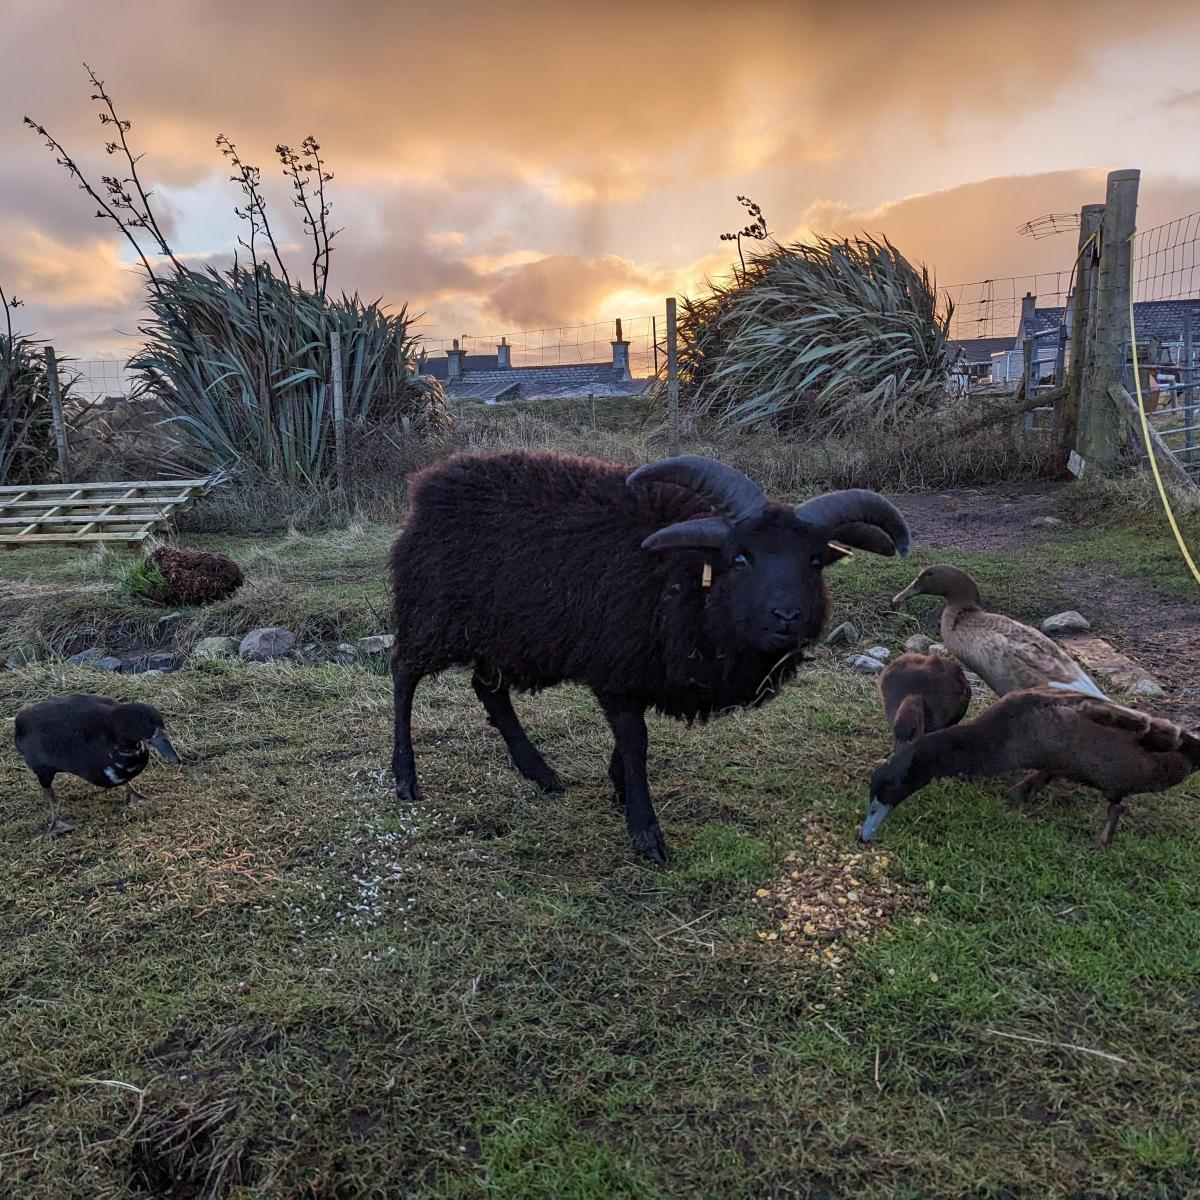 Hannah Wilkie - 'Stag' the Hebridean Tup lamb and his duckie friends in The Outer Hebrides